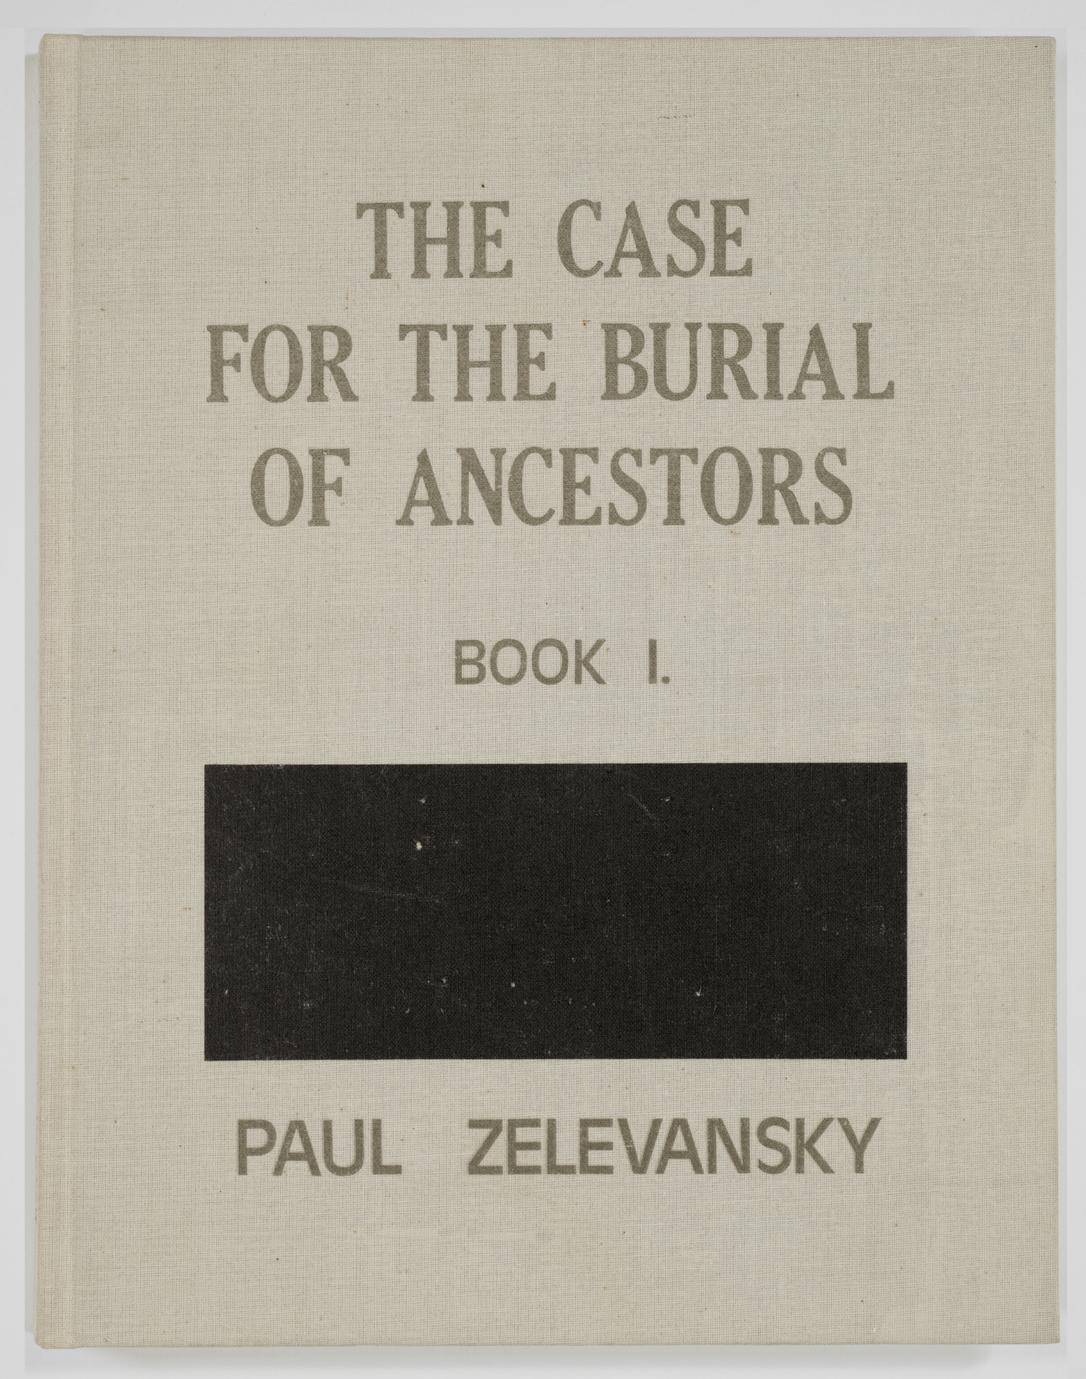 The case for the burial of ancestors (1 of 6)